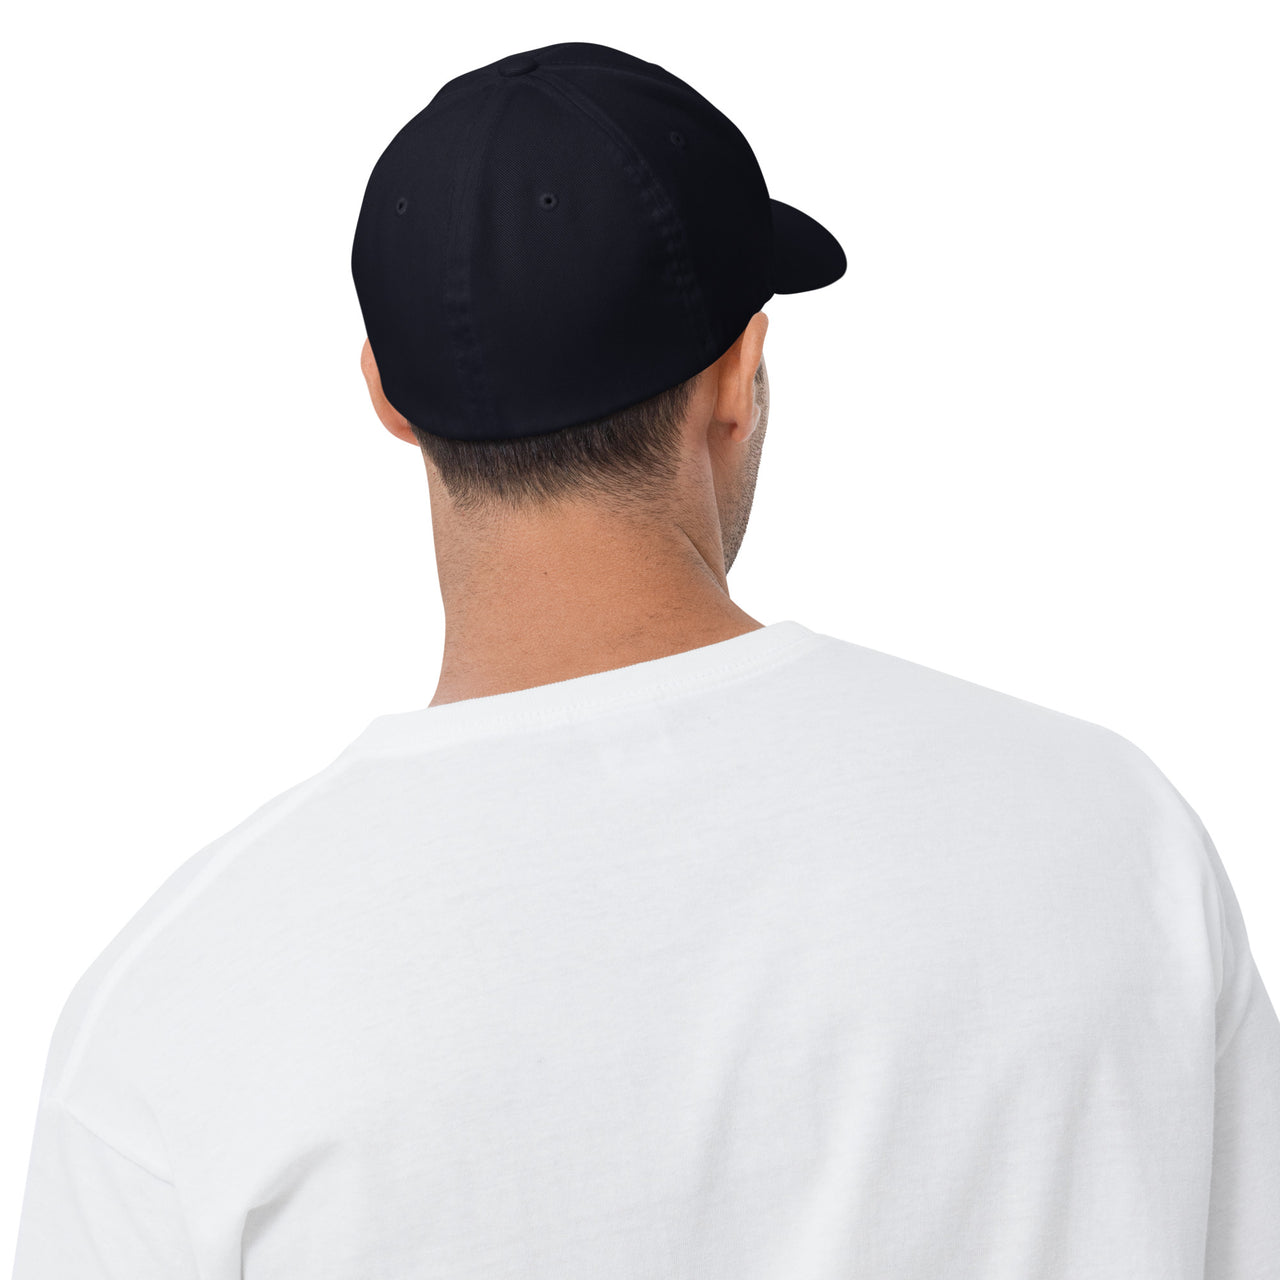 Back of man wearing navy hat and white long sleeve shirt